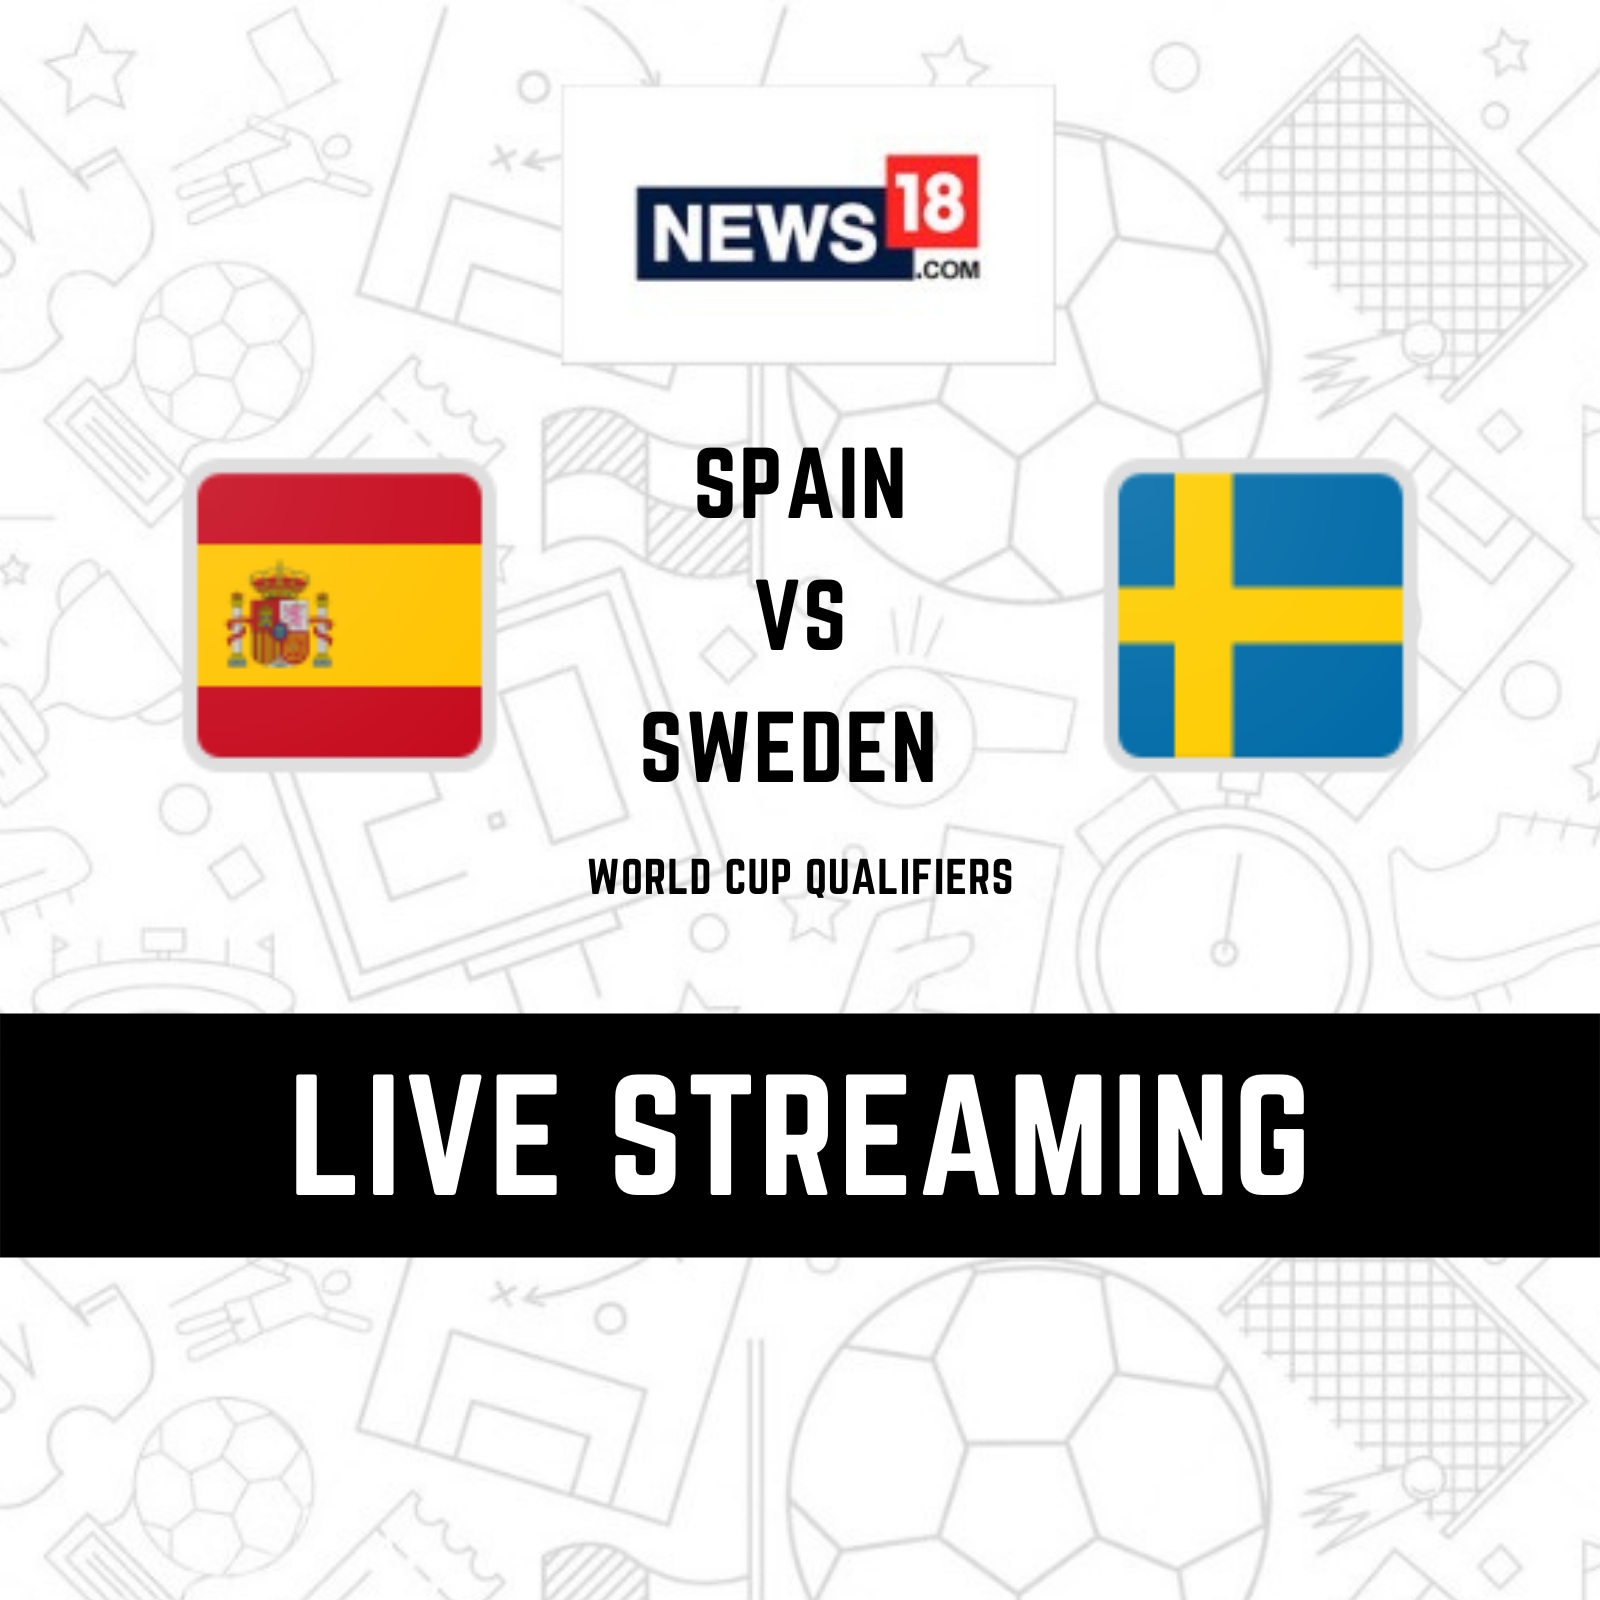 2022 FIFA World Cup Qualifiers Spain vs Sweden LIVE Streaming When and Where to Watch Online, TV Telecast, Team News